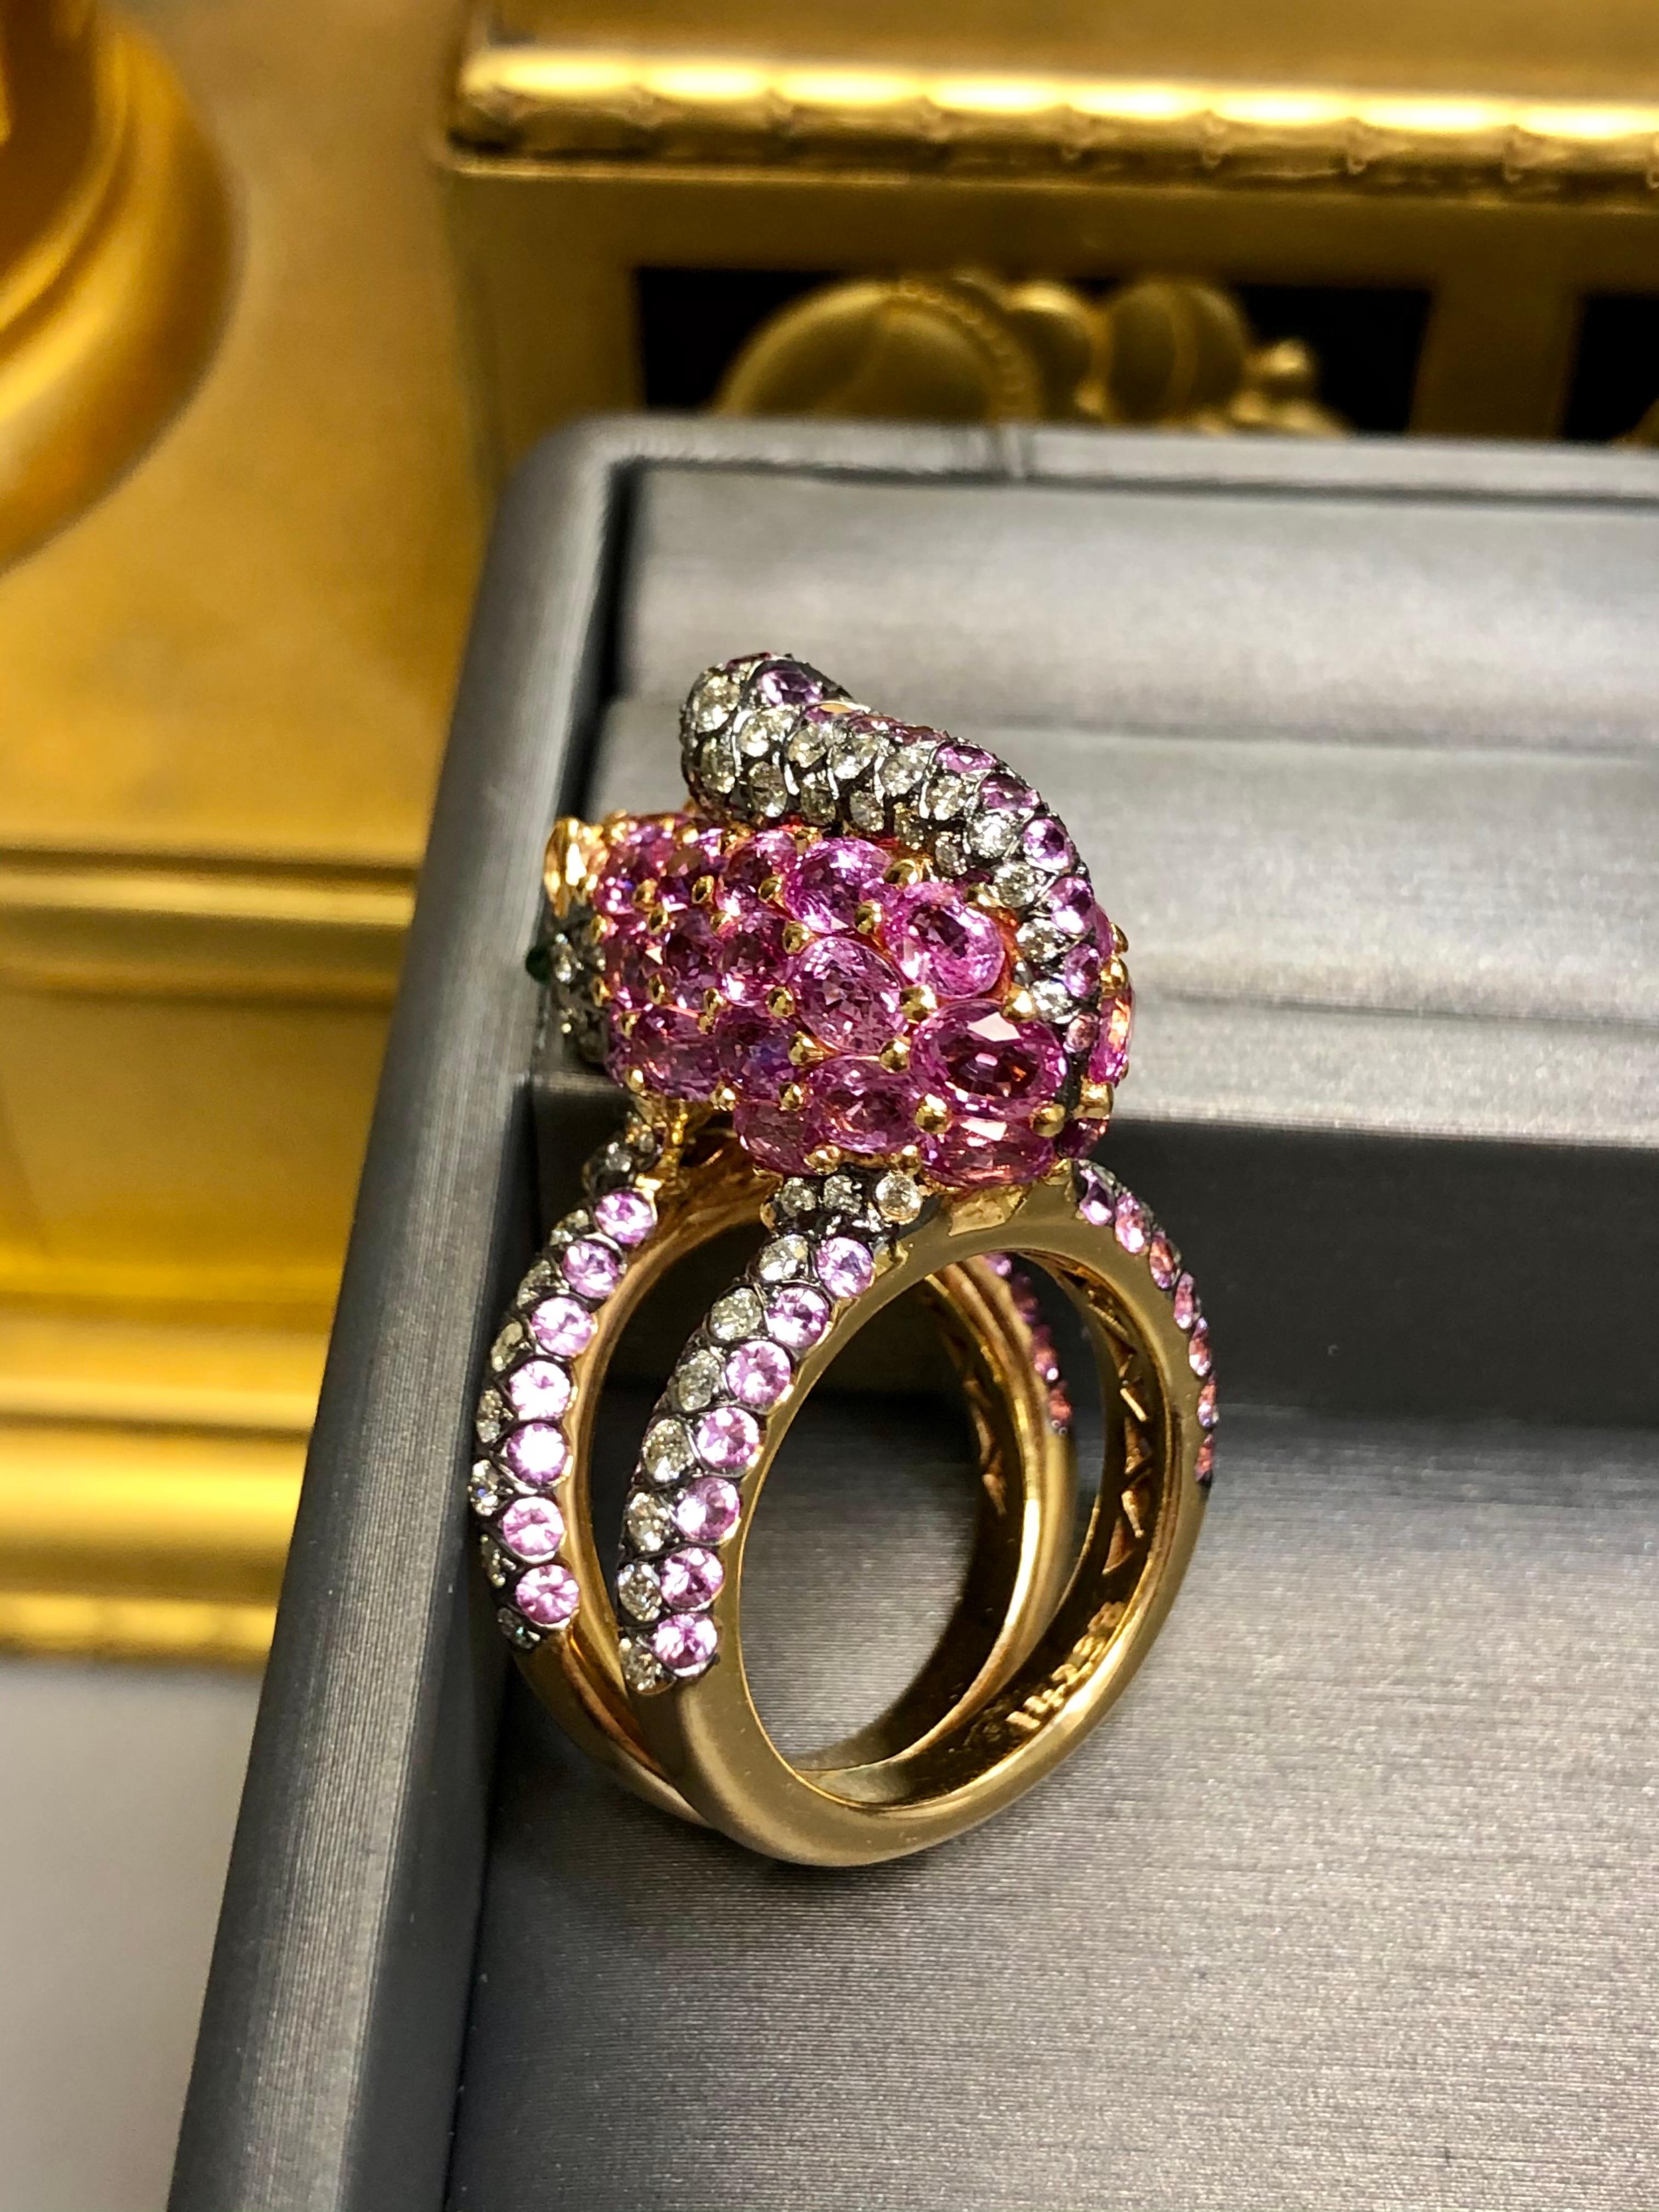 ZORAB 18K Pink Sapphire Diamond Squirrel Ring In Good Condition For Sale In Winter Springs, FL